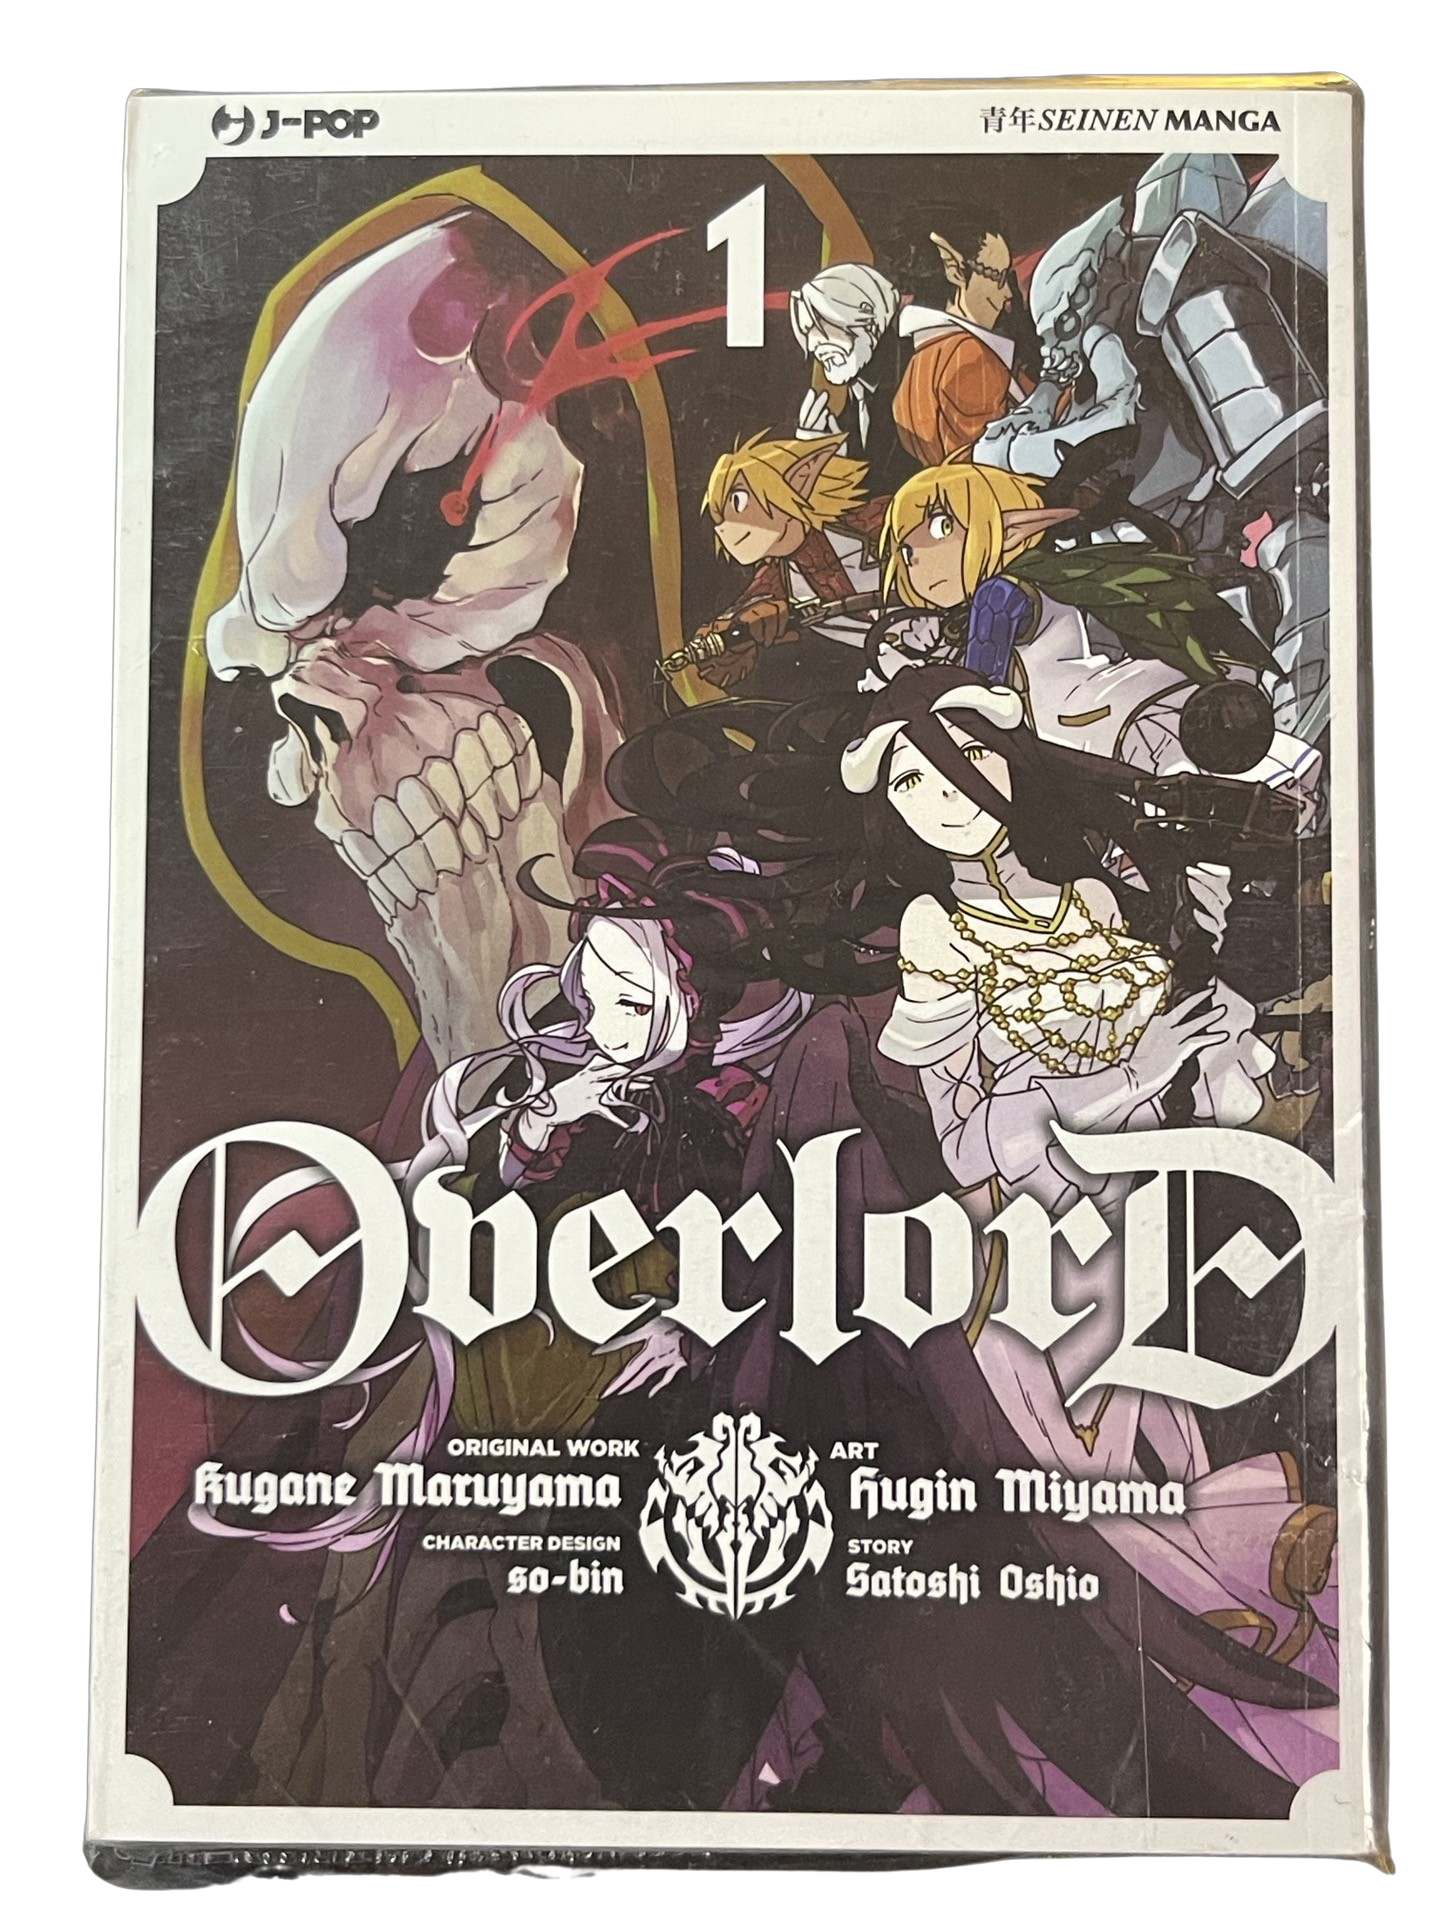 Overlord Vol. 01